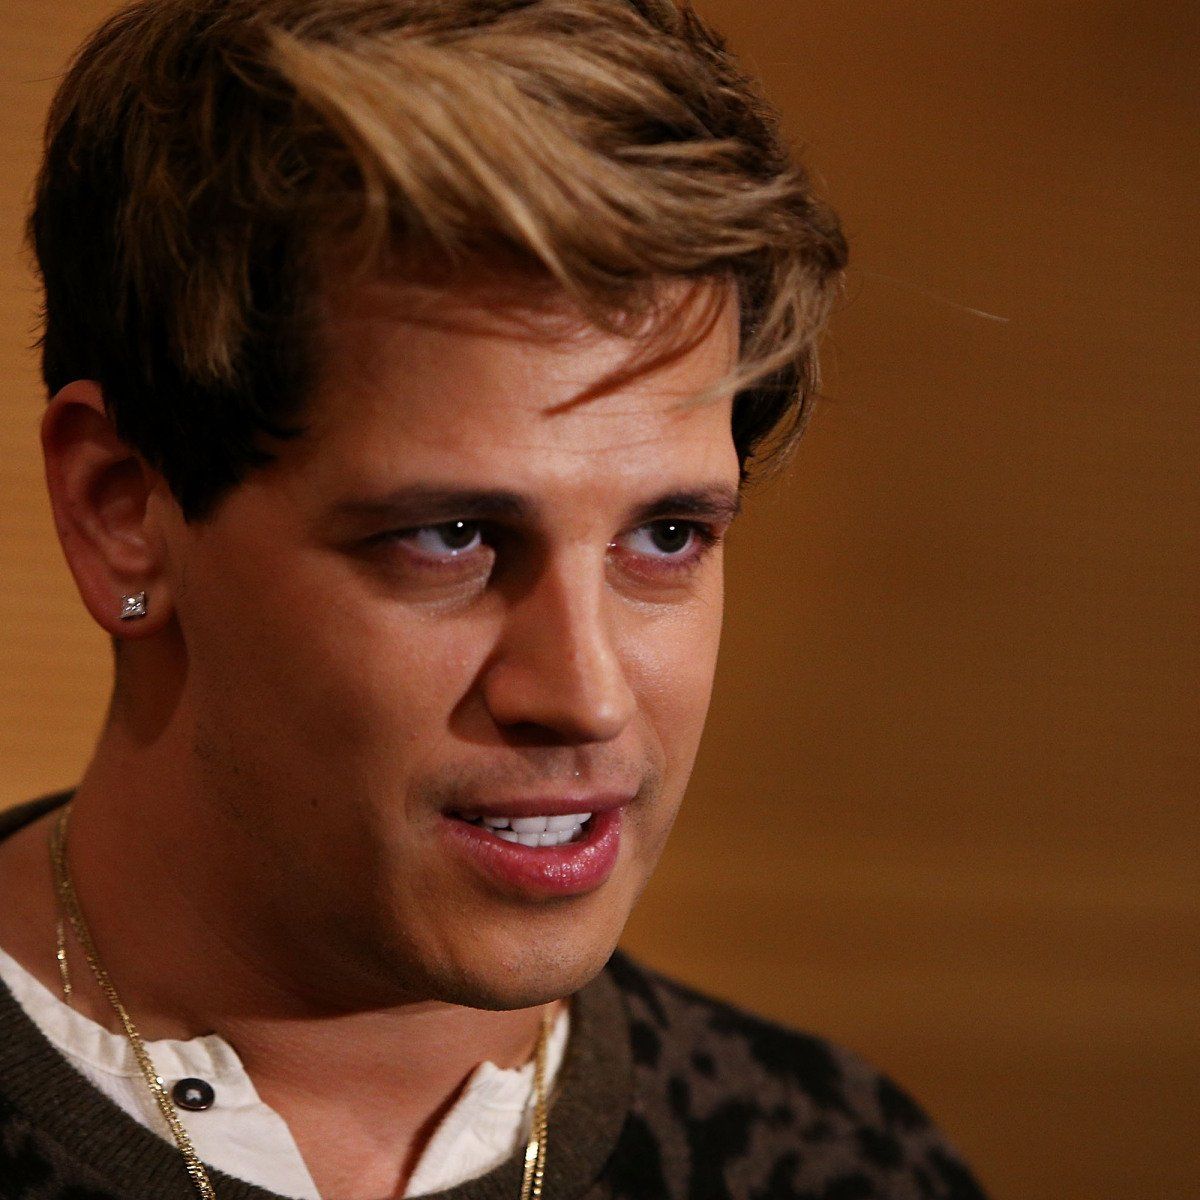 Who is Milo Yiannopoulos?